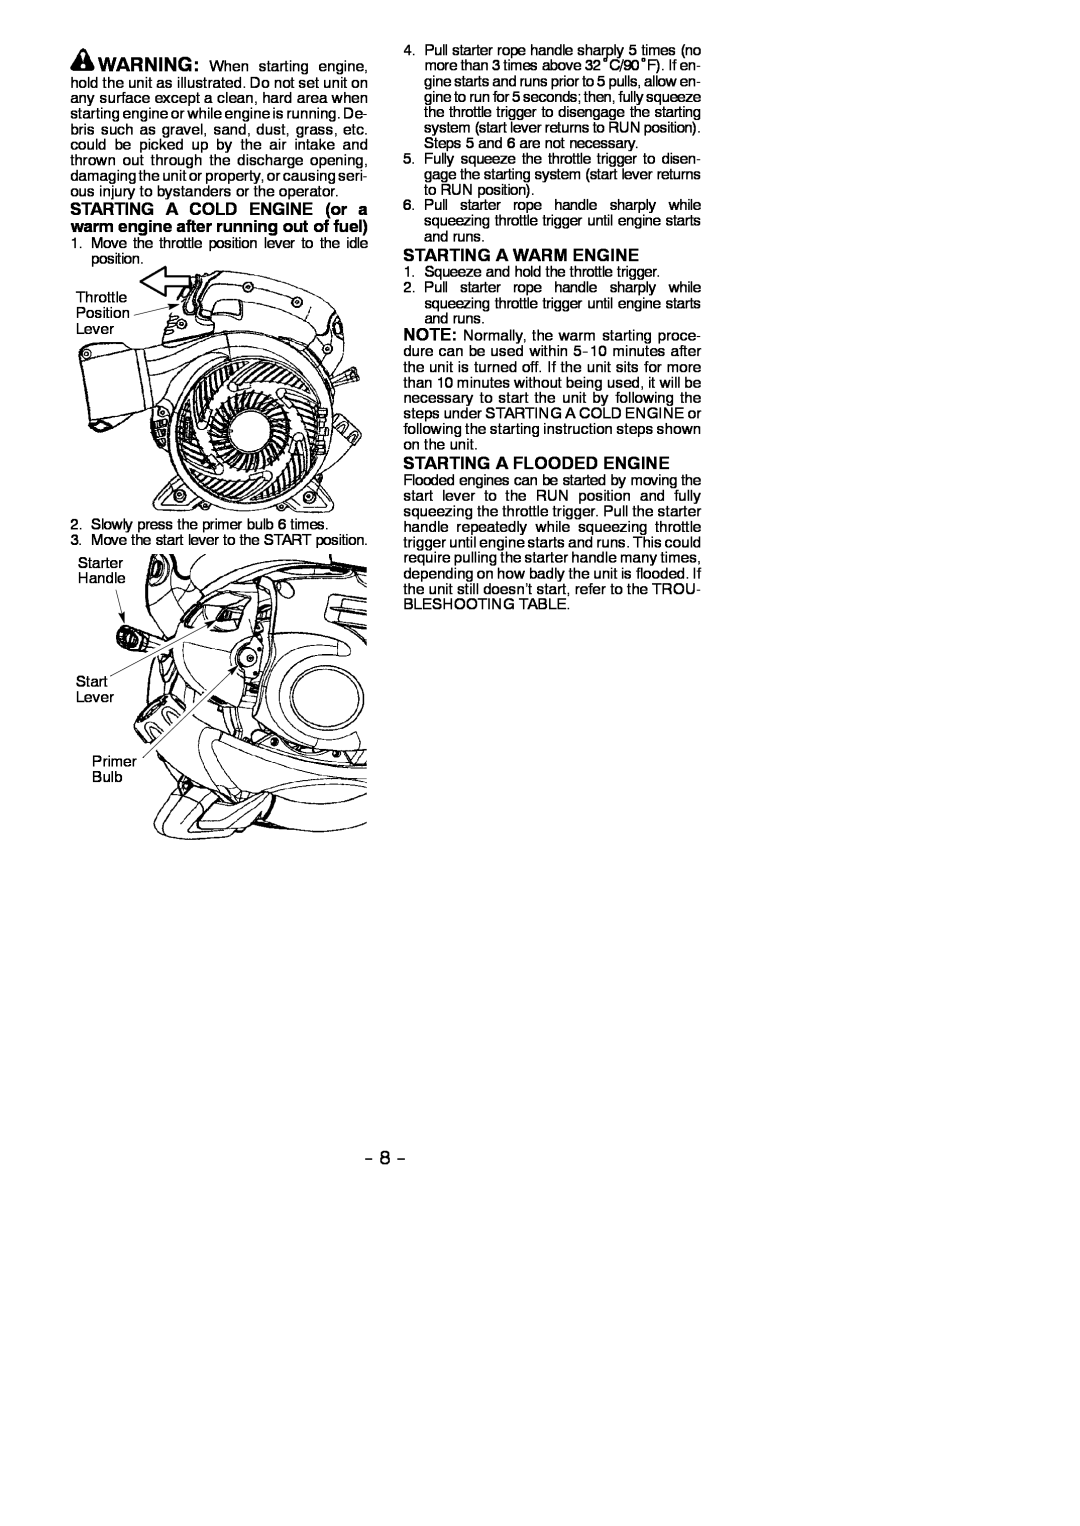 Partner Tech GBV 345 instruction manual Starting A Warm Engine, Starting A Flooded Engine 